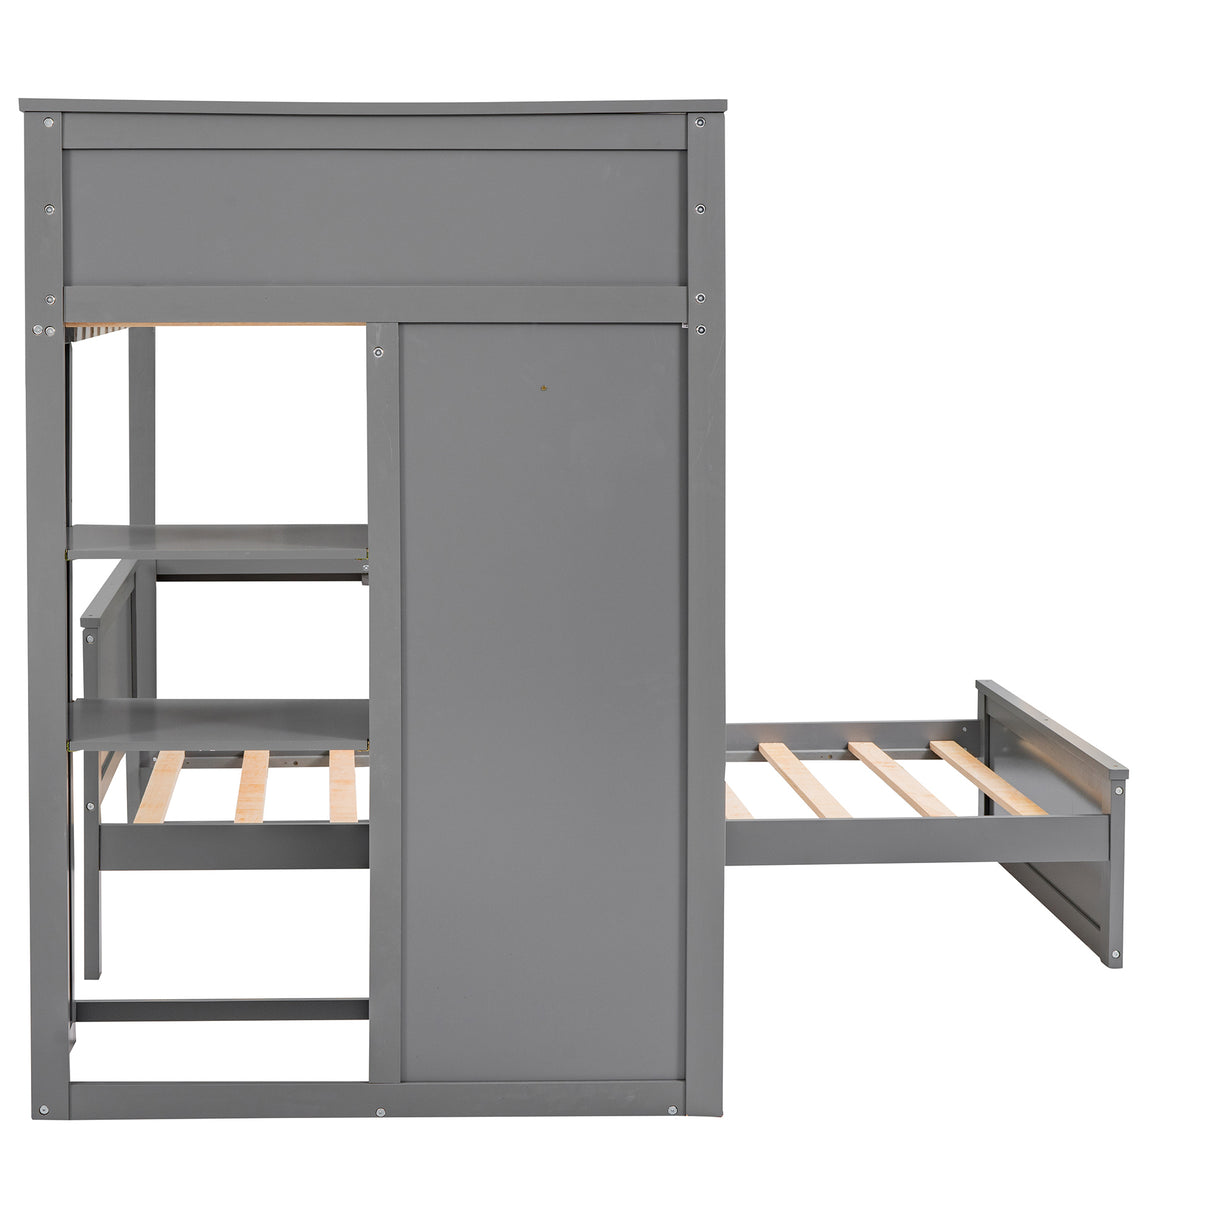 Twin size Loft Bed with a Stand-alone bed, Shelves,Desk,and Wardrobe-Gray - Home Elegance USA